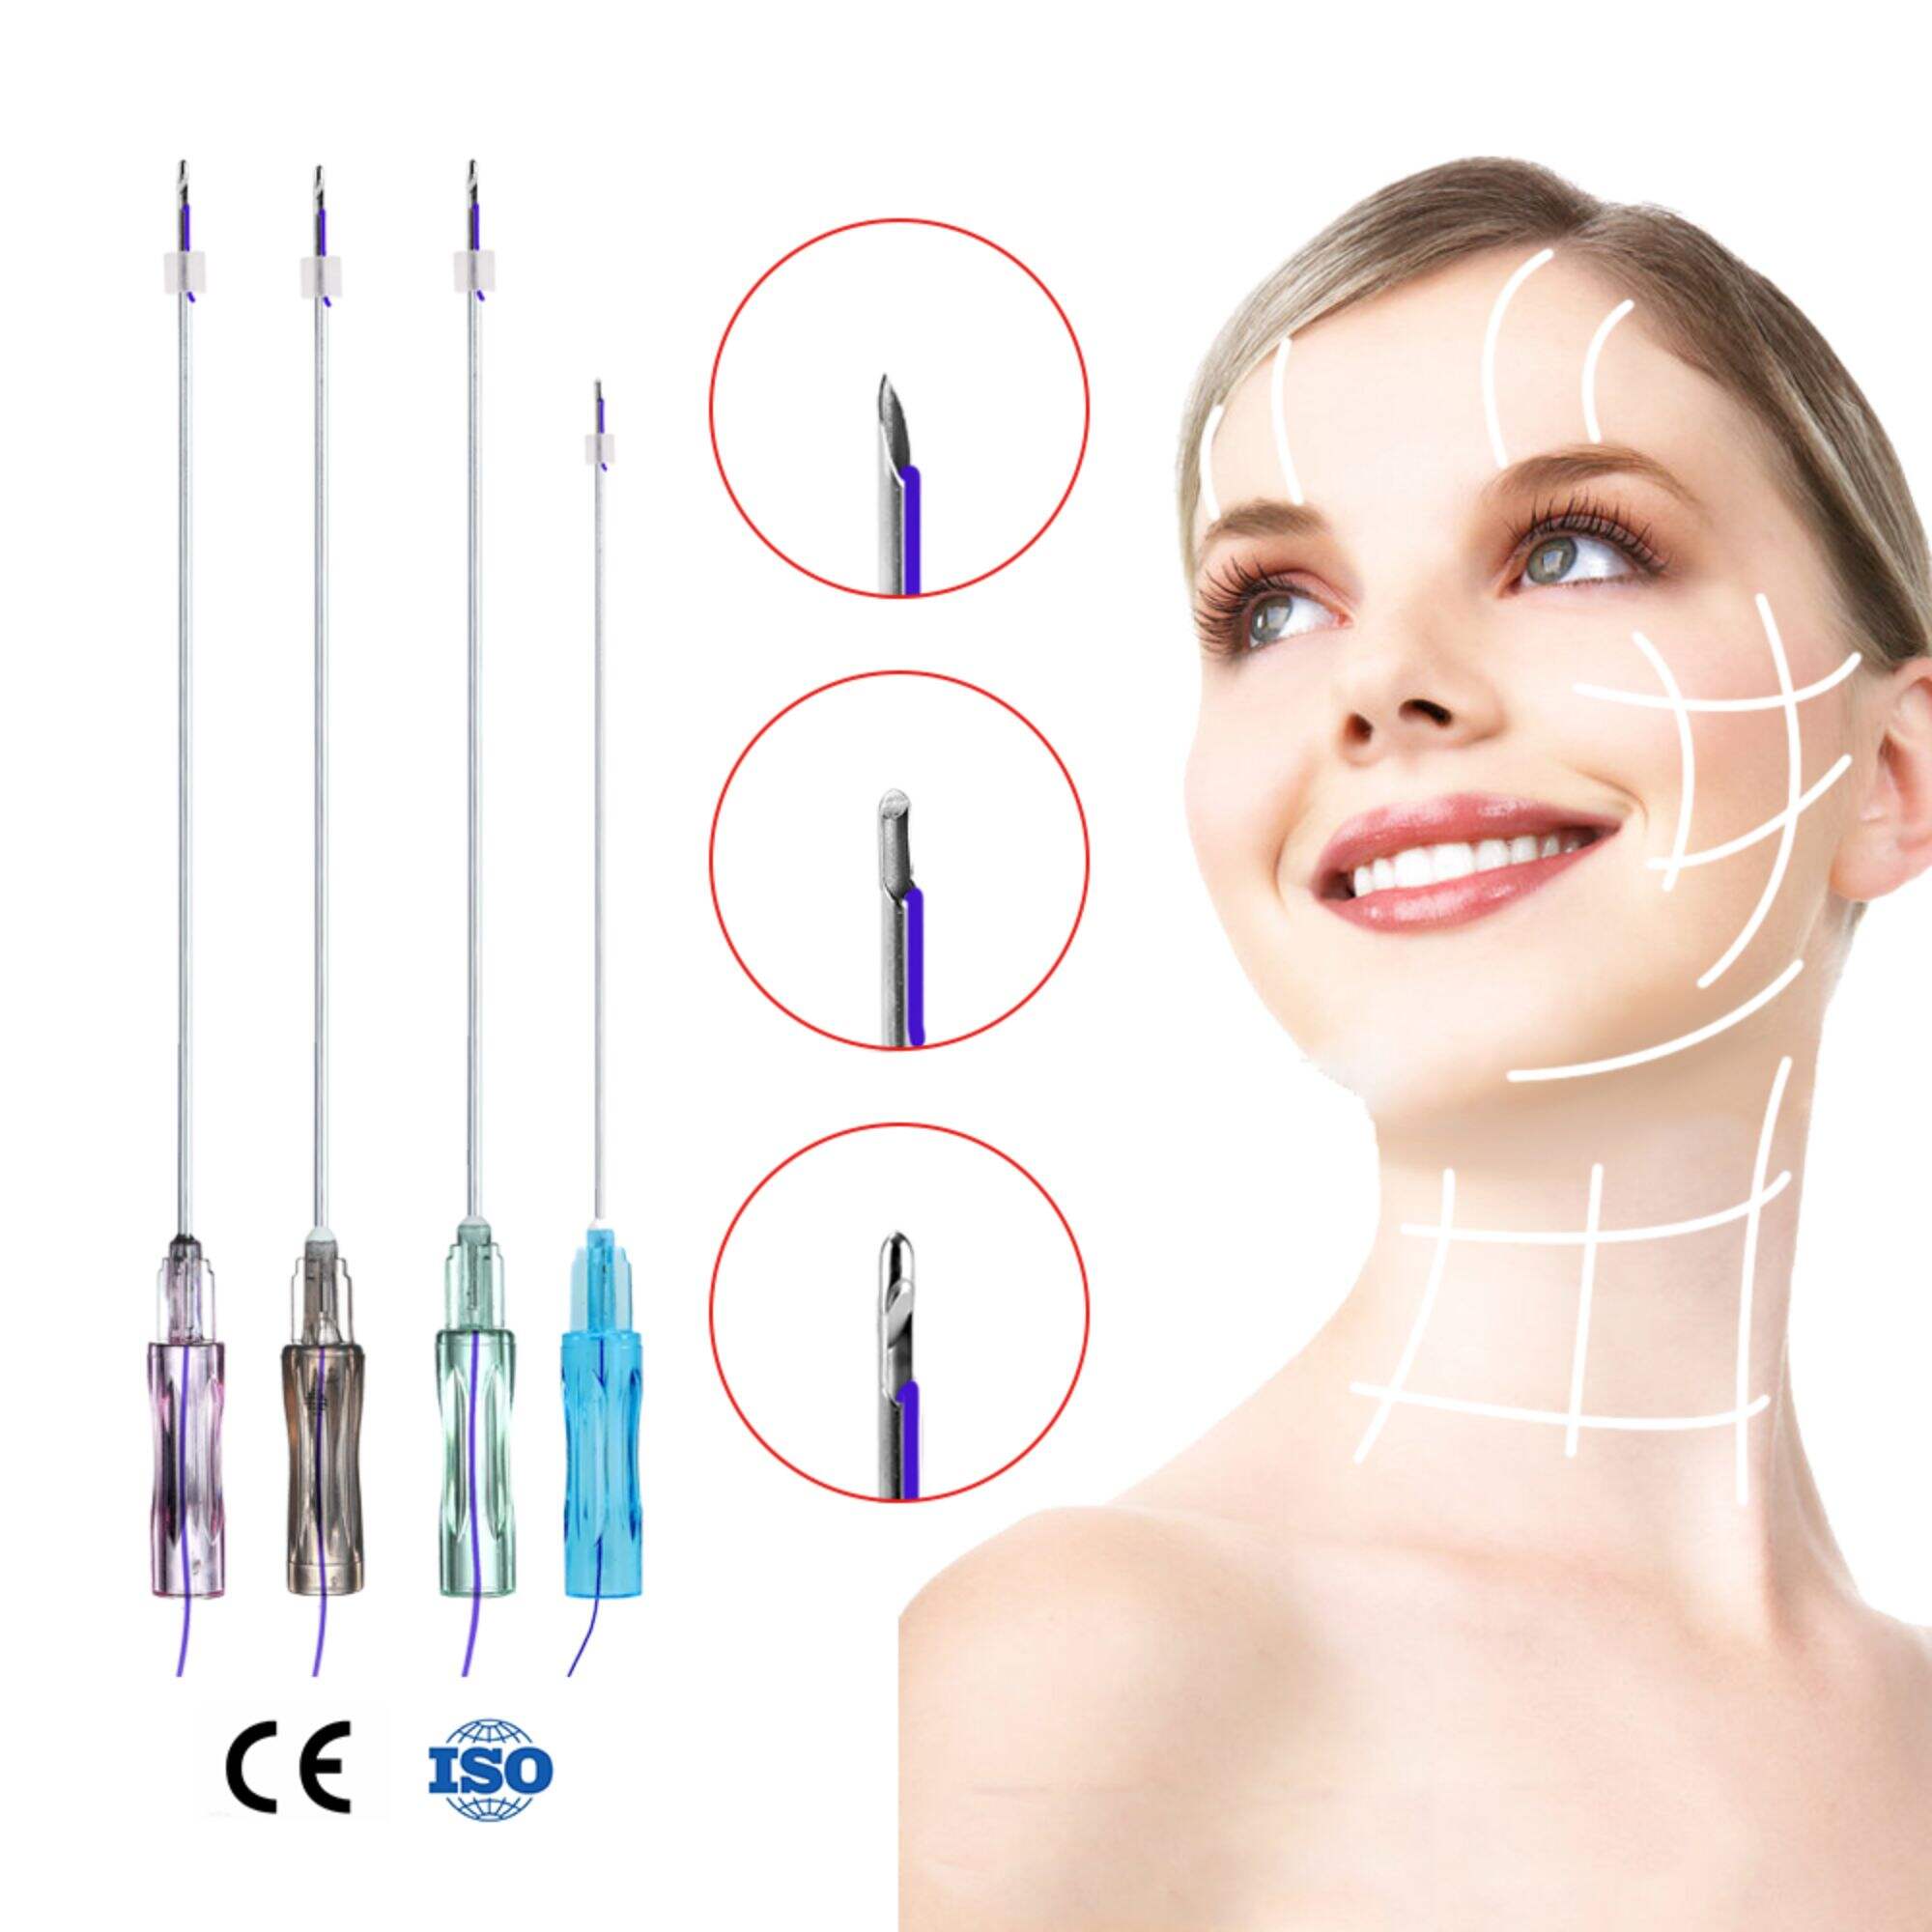 Korean Molding Barbed Cog Facial Tensioning Hilos Pcl Pdo Multi Smooth Wrinkles Wpdo Mono Thread With Ce Certified